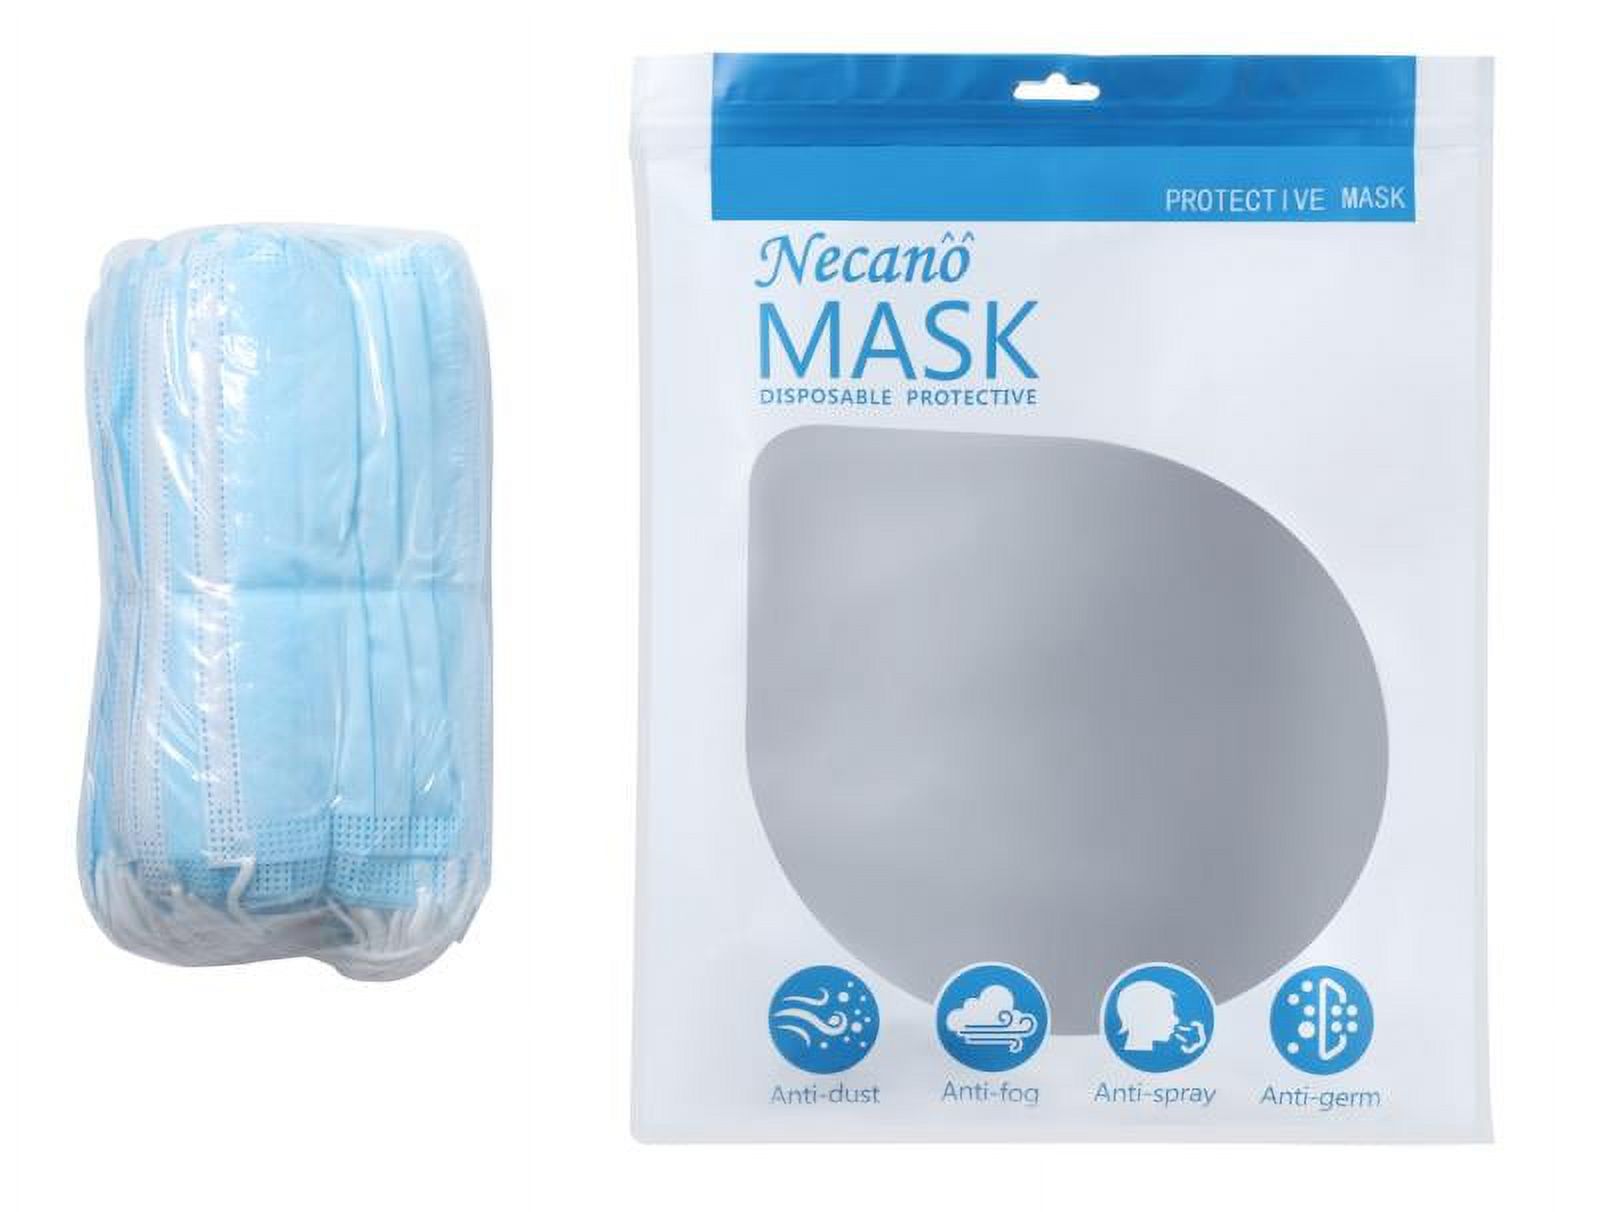 Necano disposable face mask 50cts - image 1 of 6